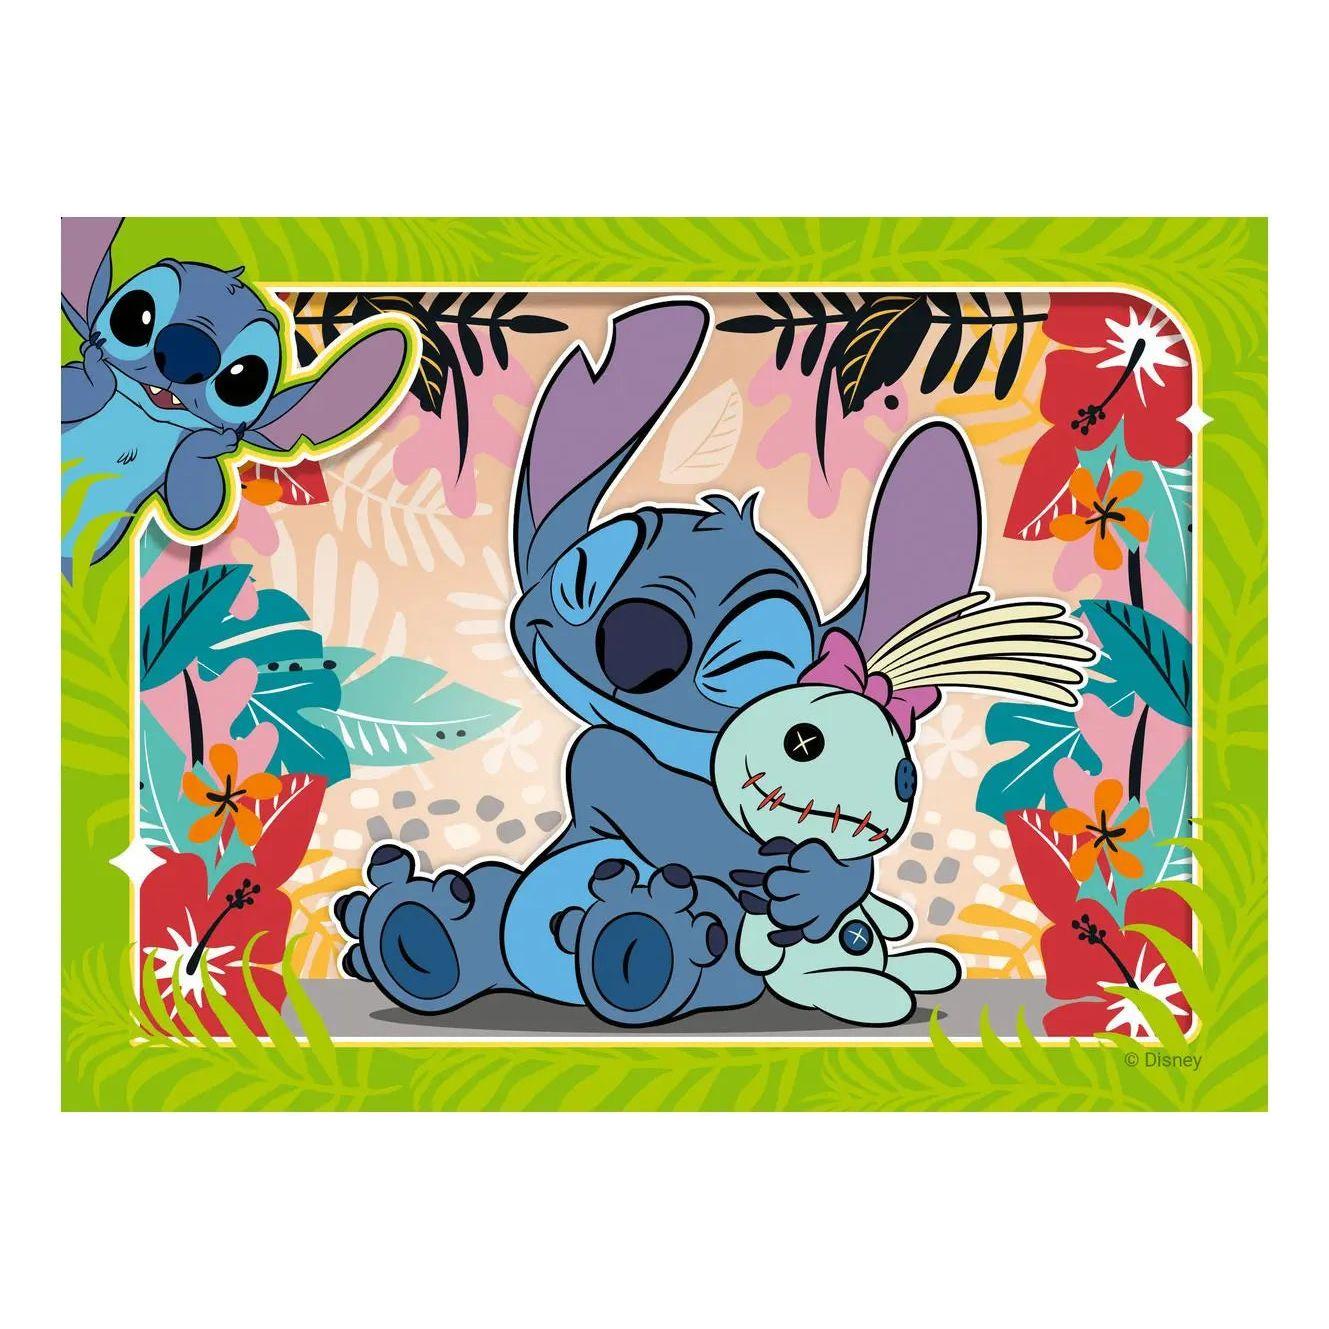 Ravensburger Stitch with Ears 72 piece 3D Jigsaw Puzzle